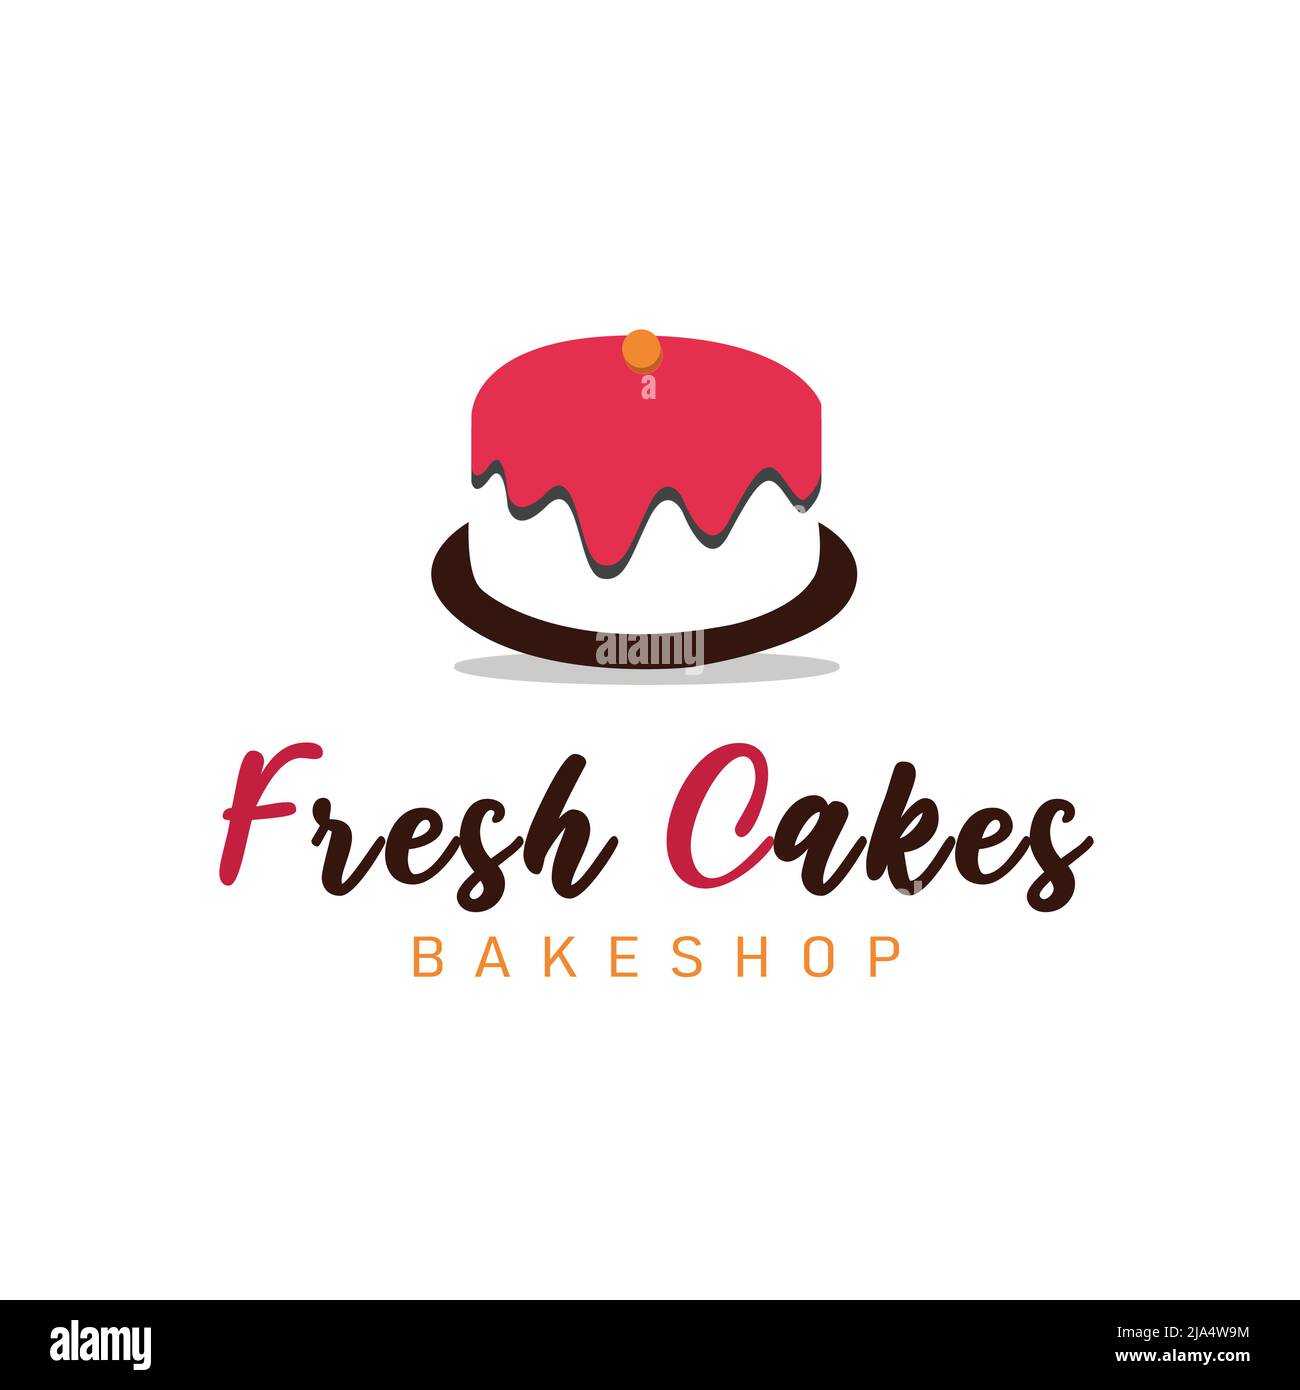 Bakery Logo png images | PNGWing